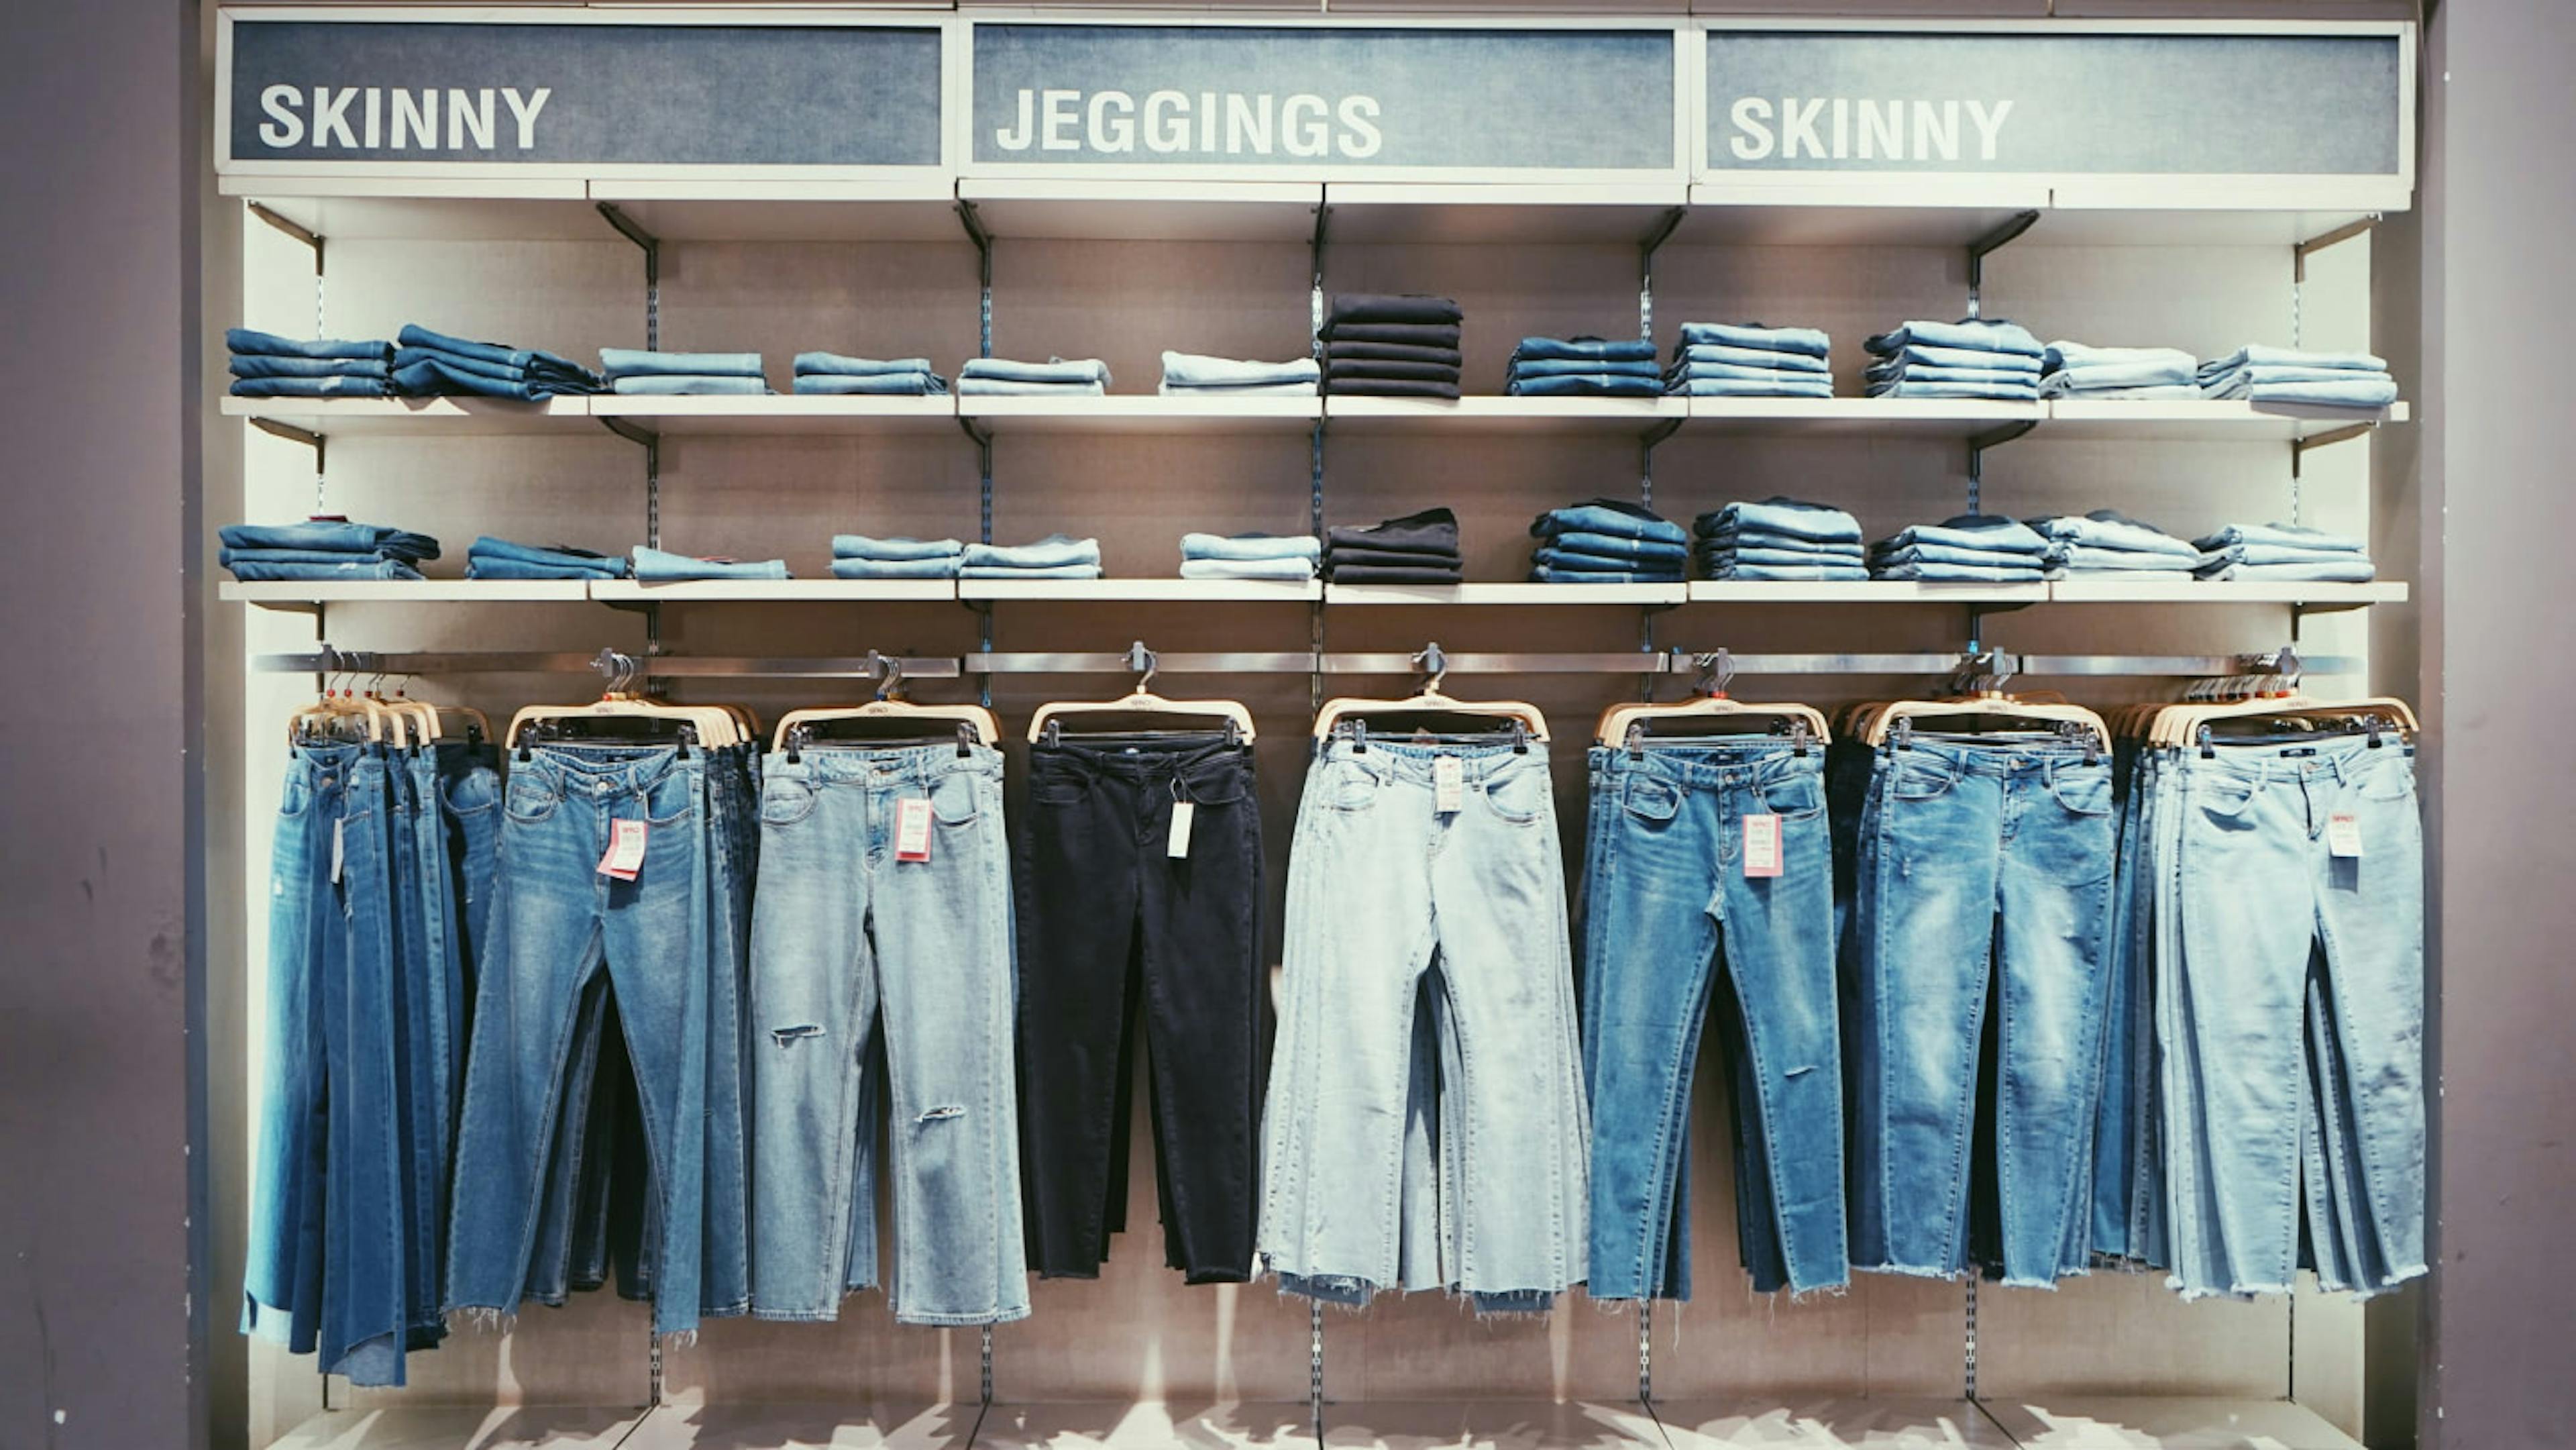 Women's jeans sizing is all over the place.